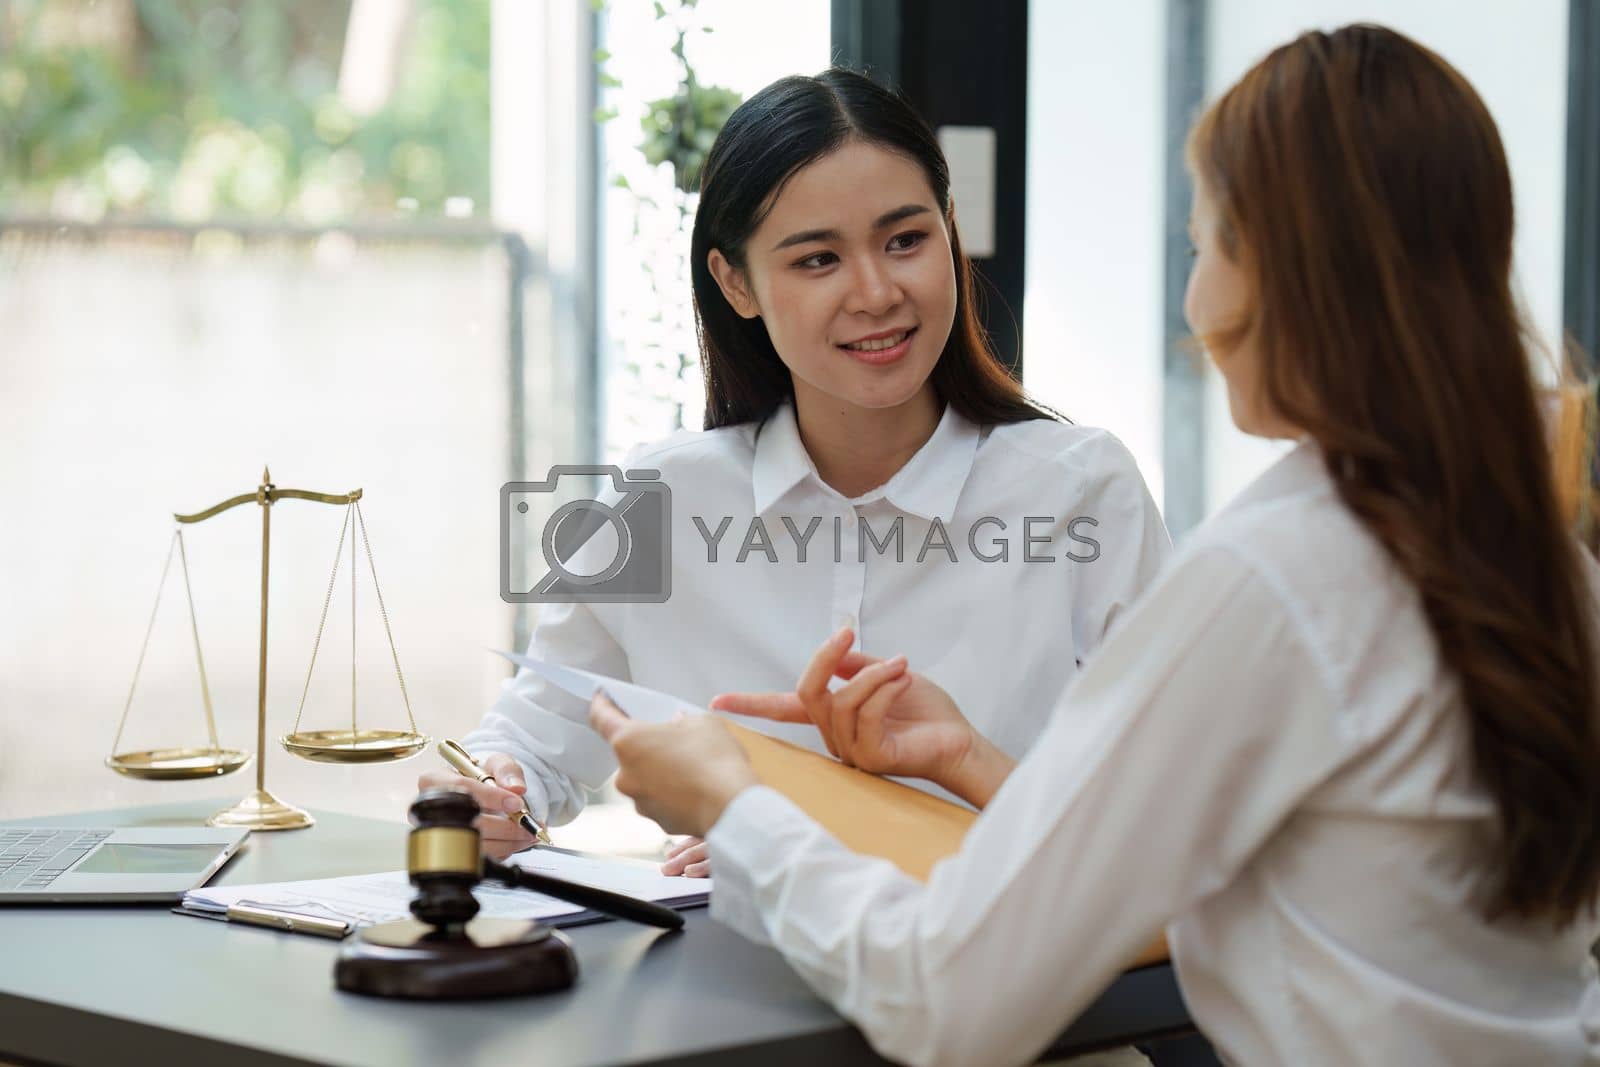 Royalty free image of Business lawyer team working together in the private meeting. Law, legal services, advice, Justice concept. by itchaznong